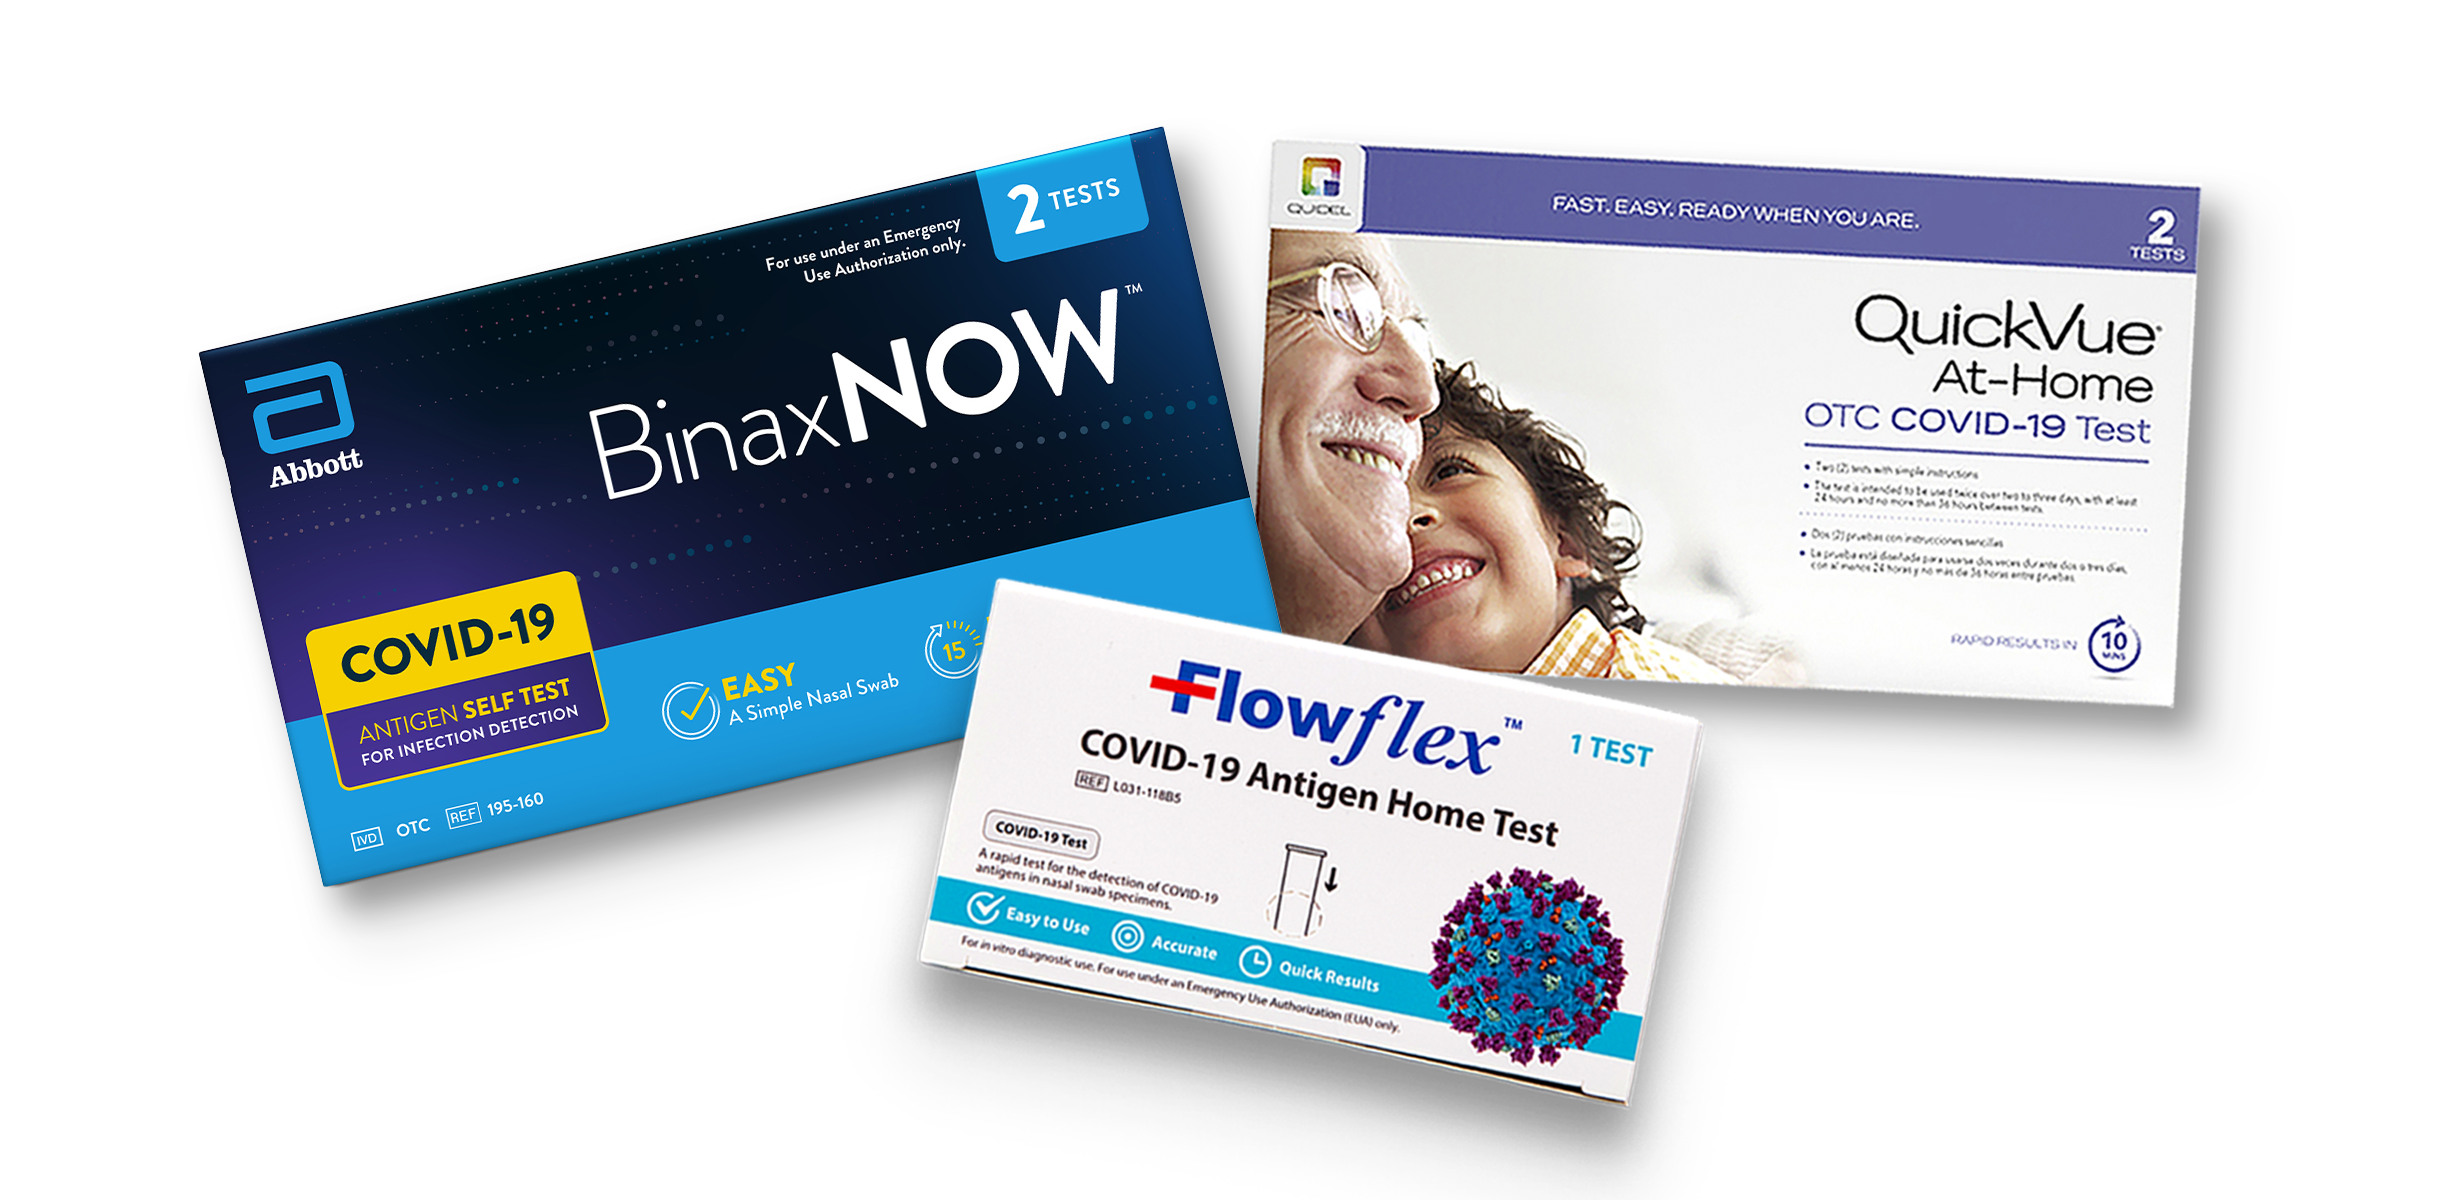 Learn more about at-home COVID-19 tests, showing BinaxNOW™, FlowFlex™ and QuickVue®